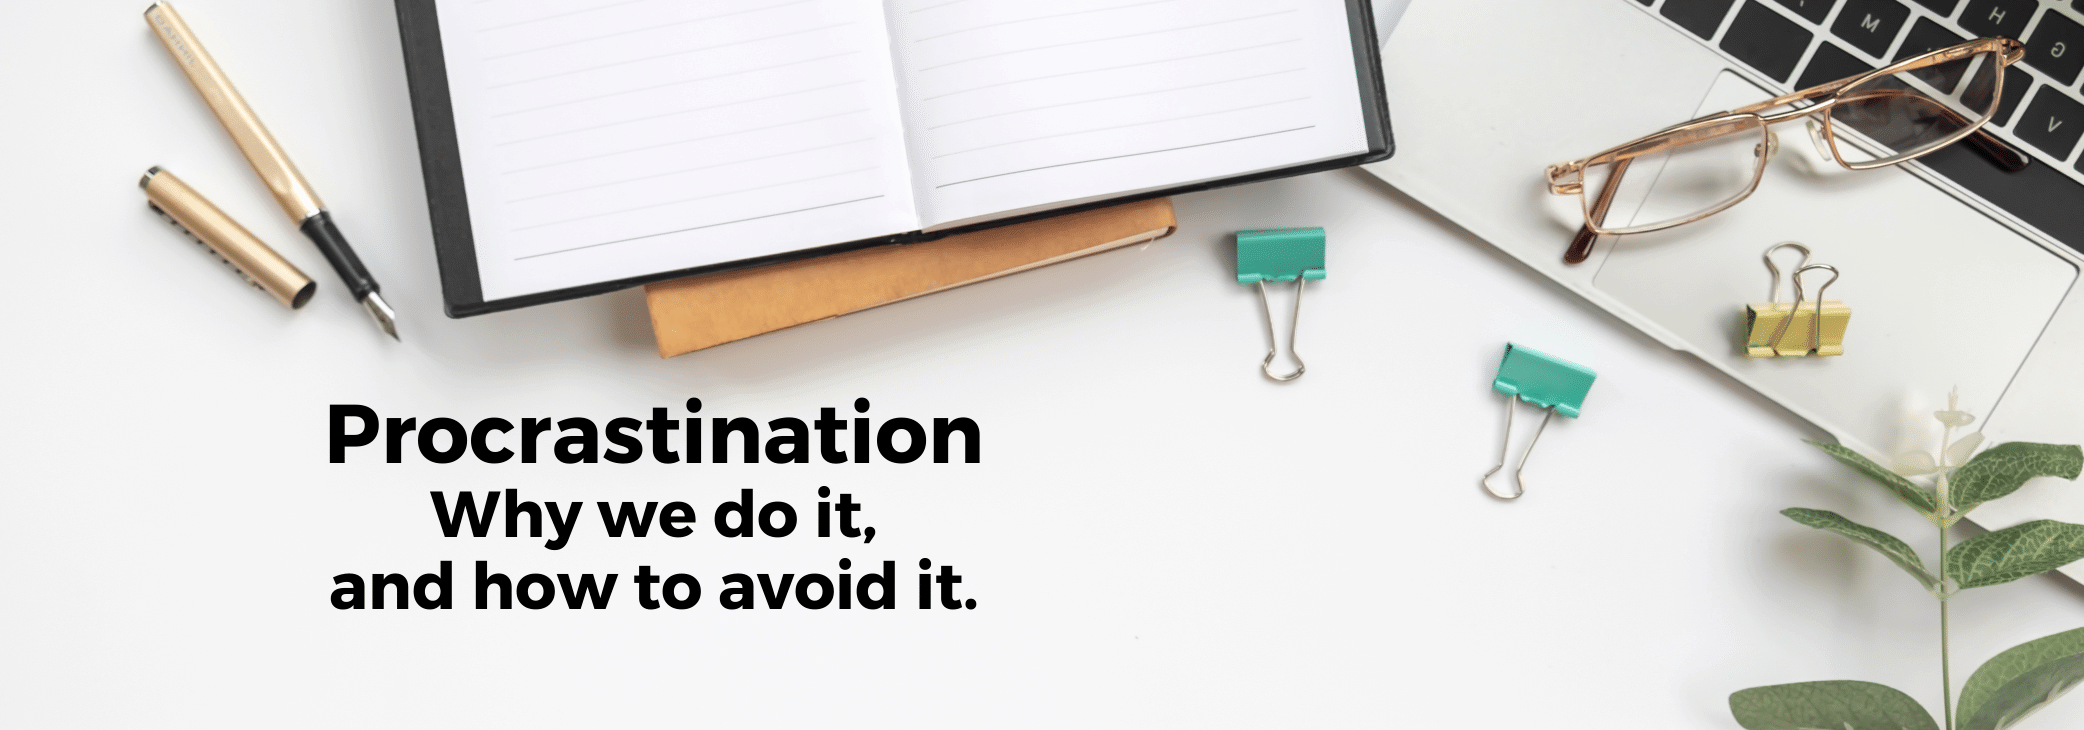 Procrastination - Why we do it, and how to avoid it.